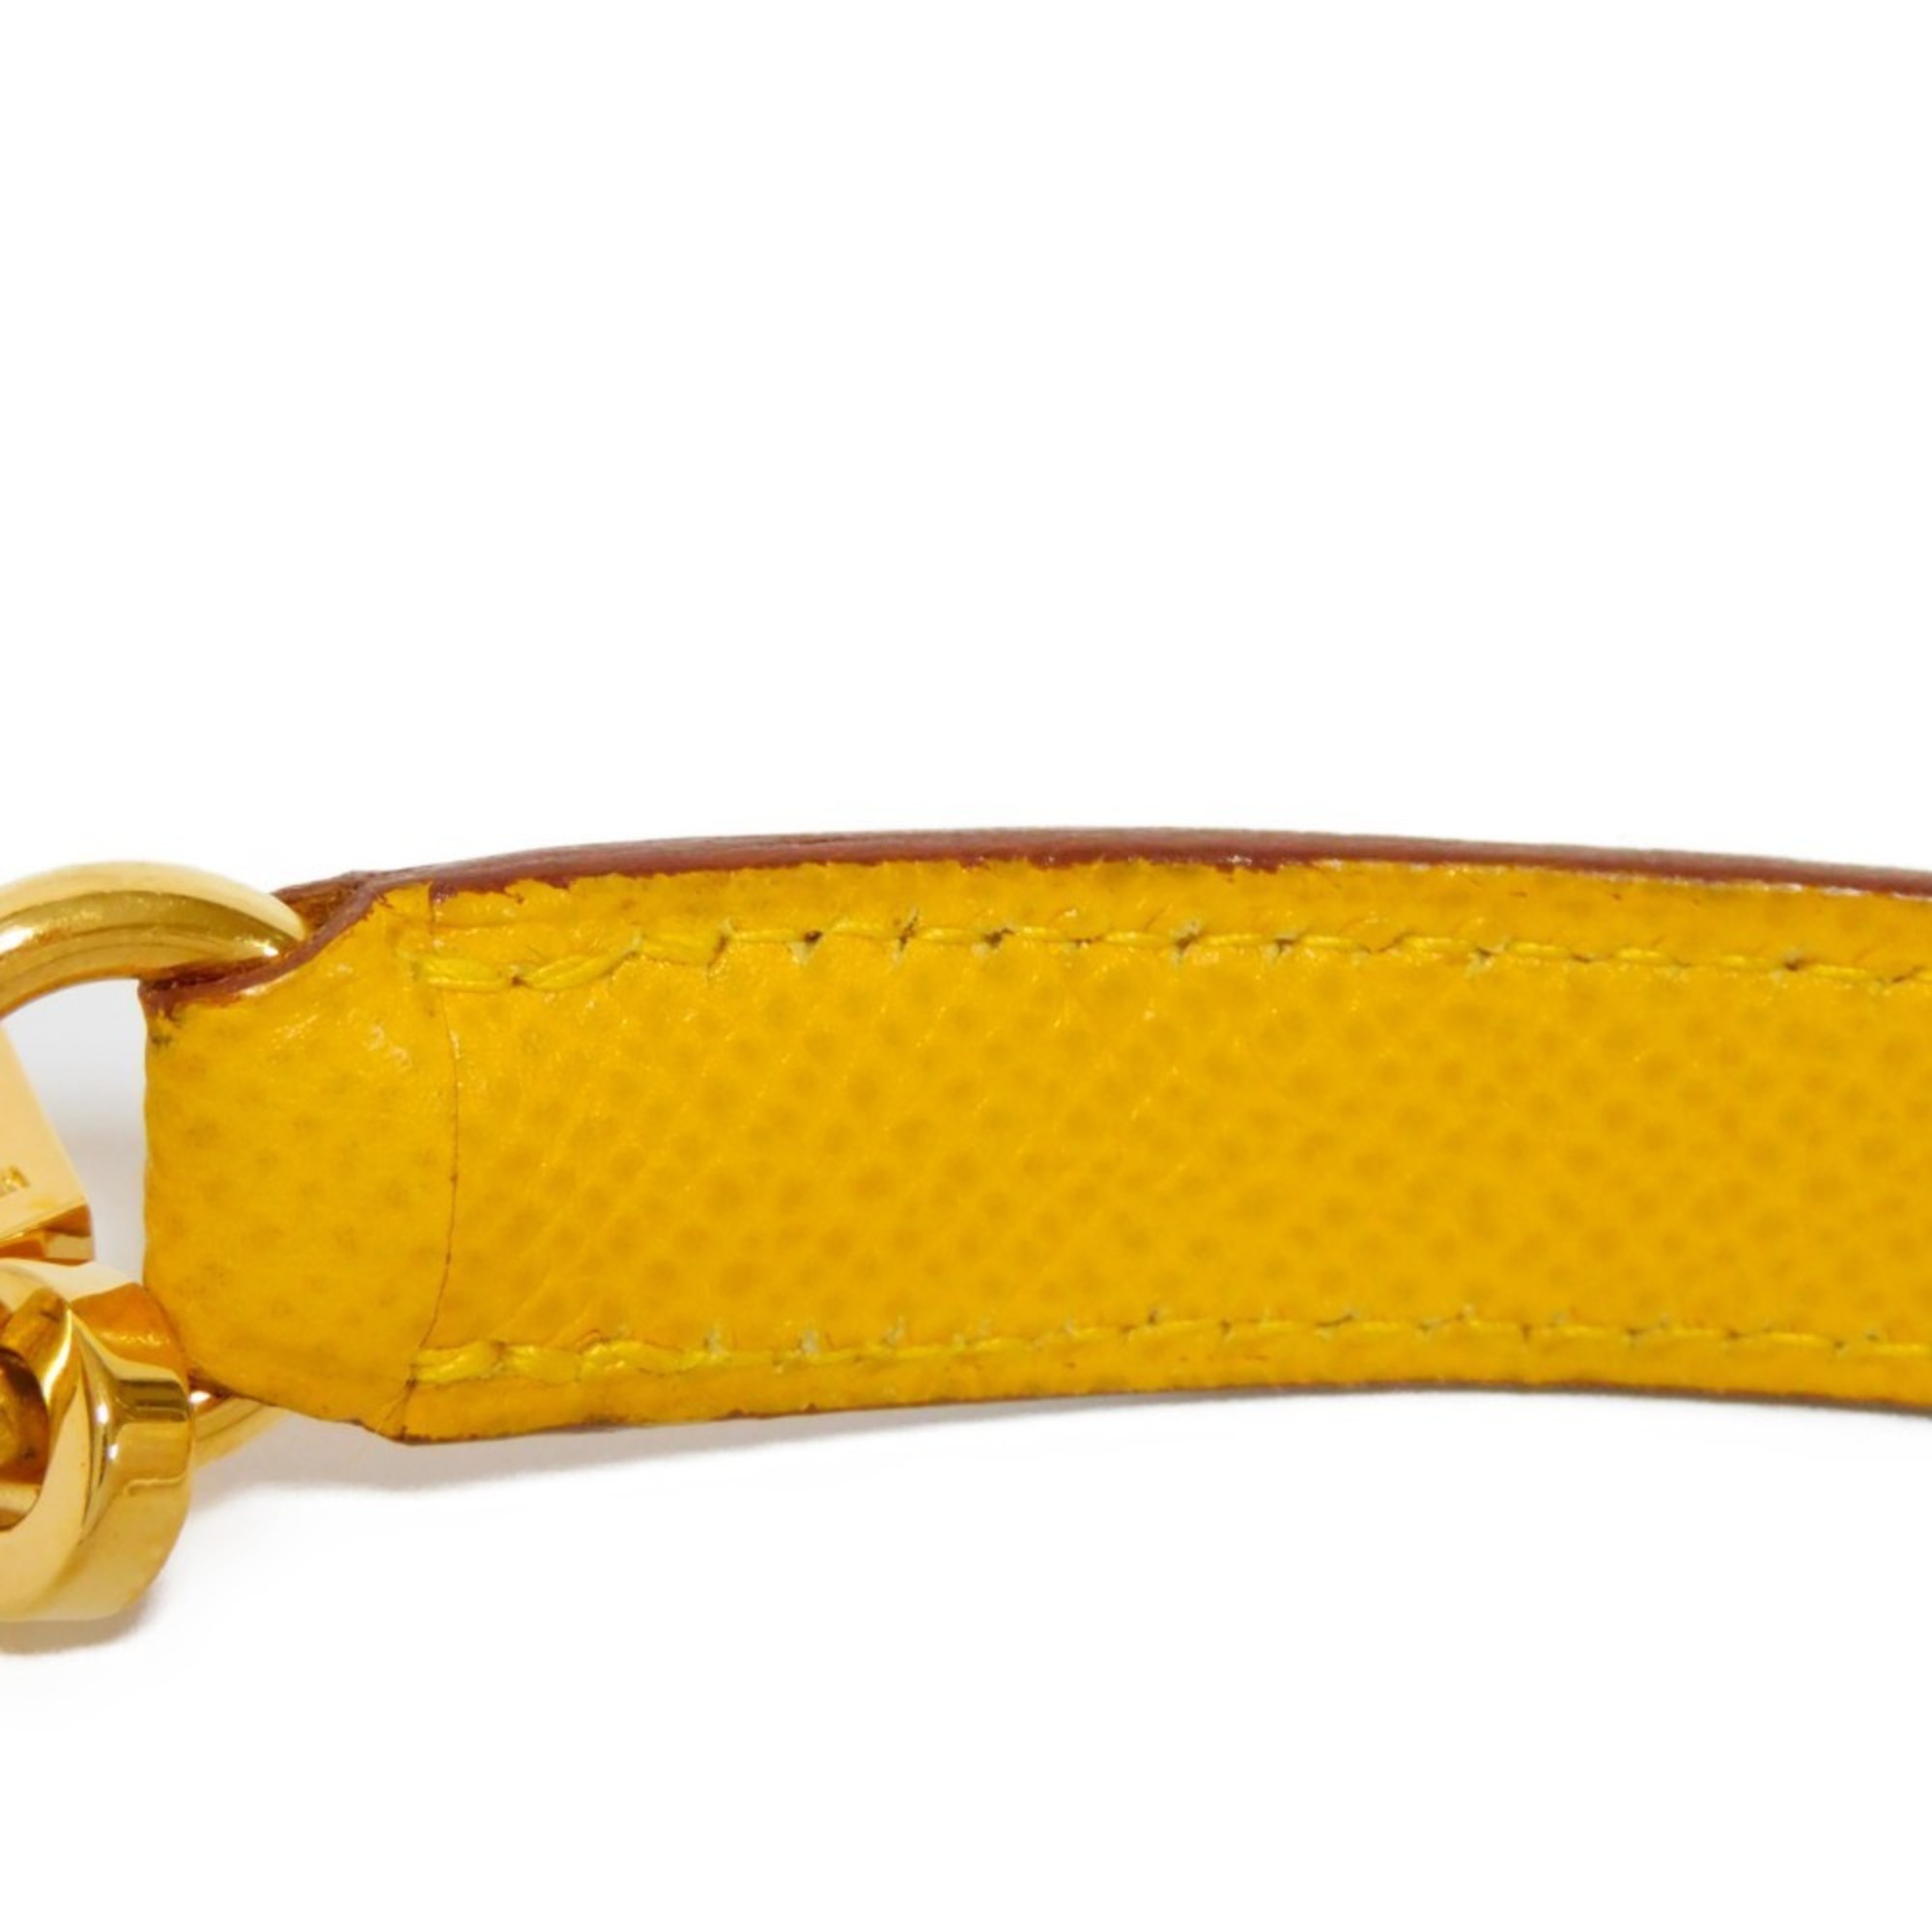 HERMES Shoulder Strap Bandouliere 90 Kelly Bolide Yellow G Hardware Not Adjustable GP Plated Gold Couchevel Jaune Ladies